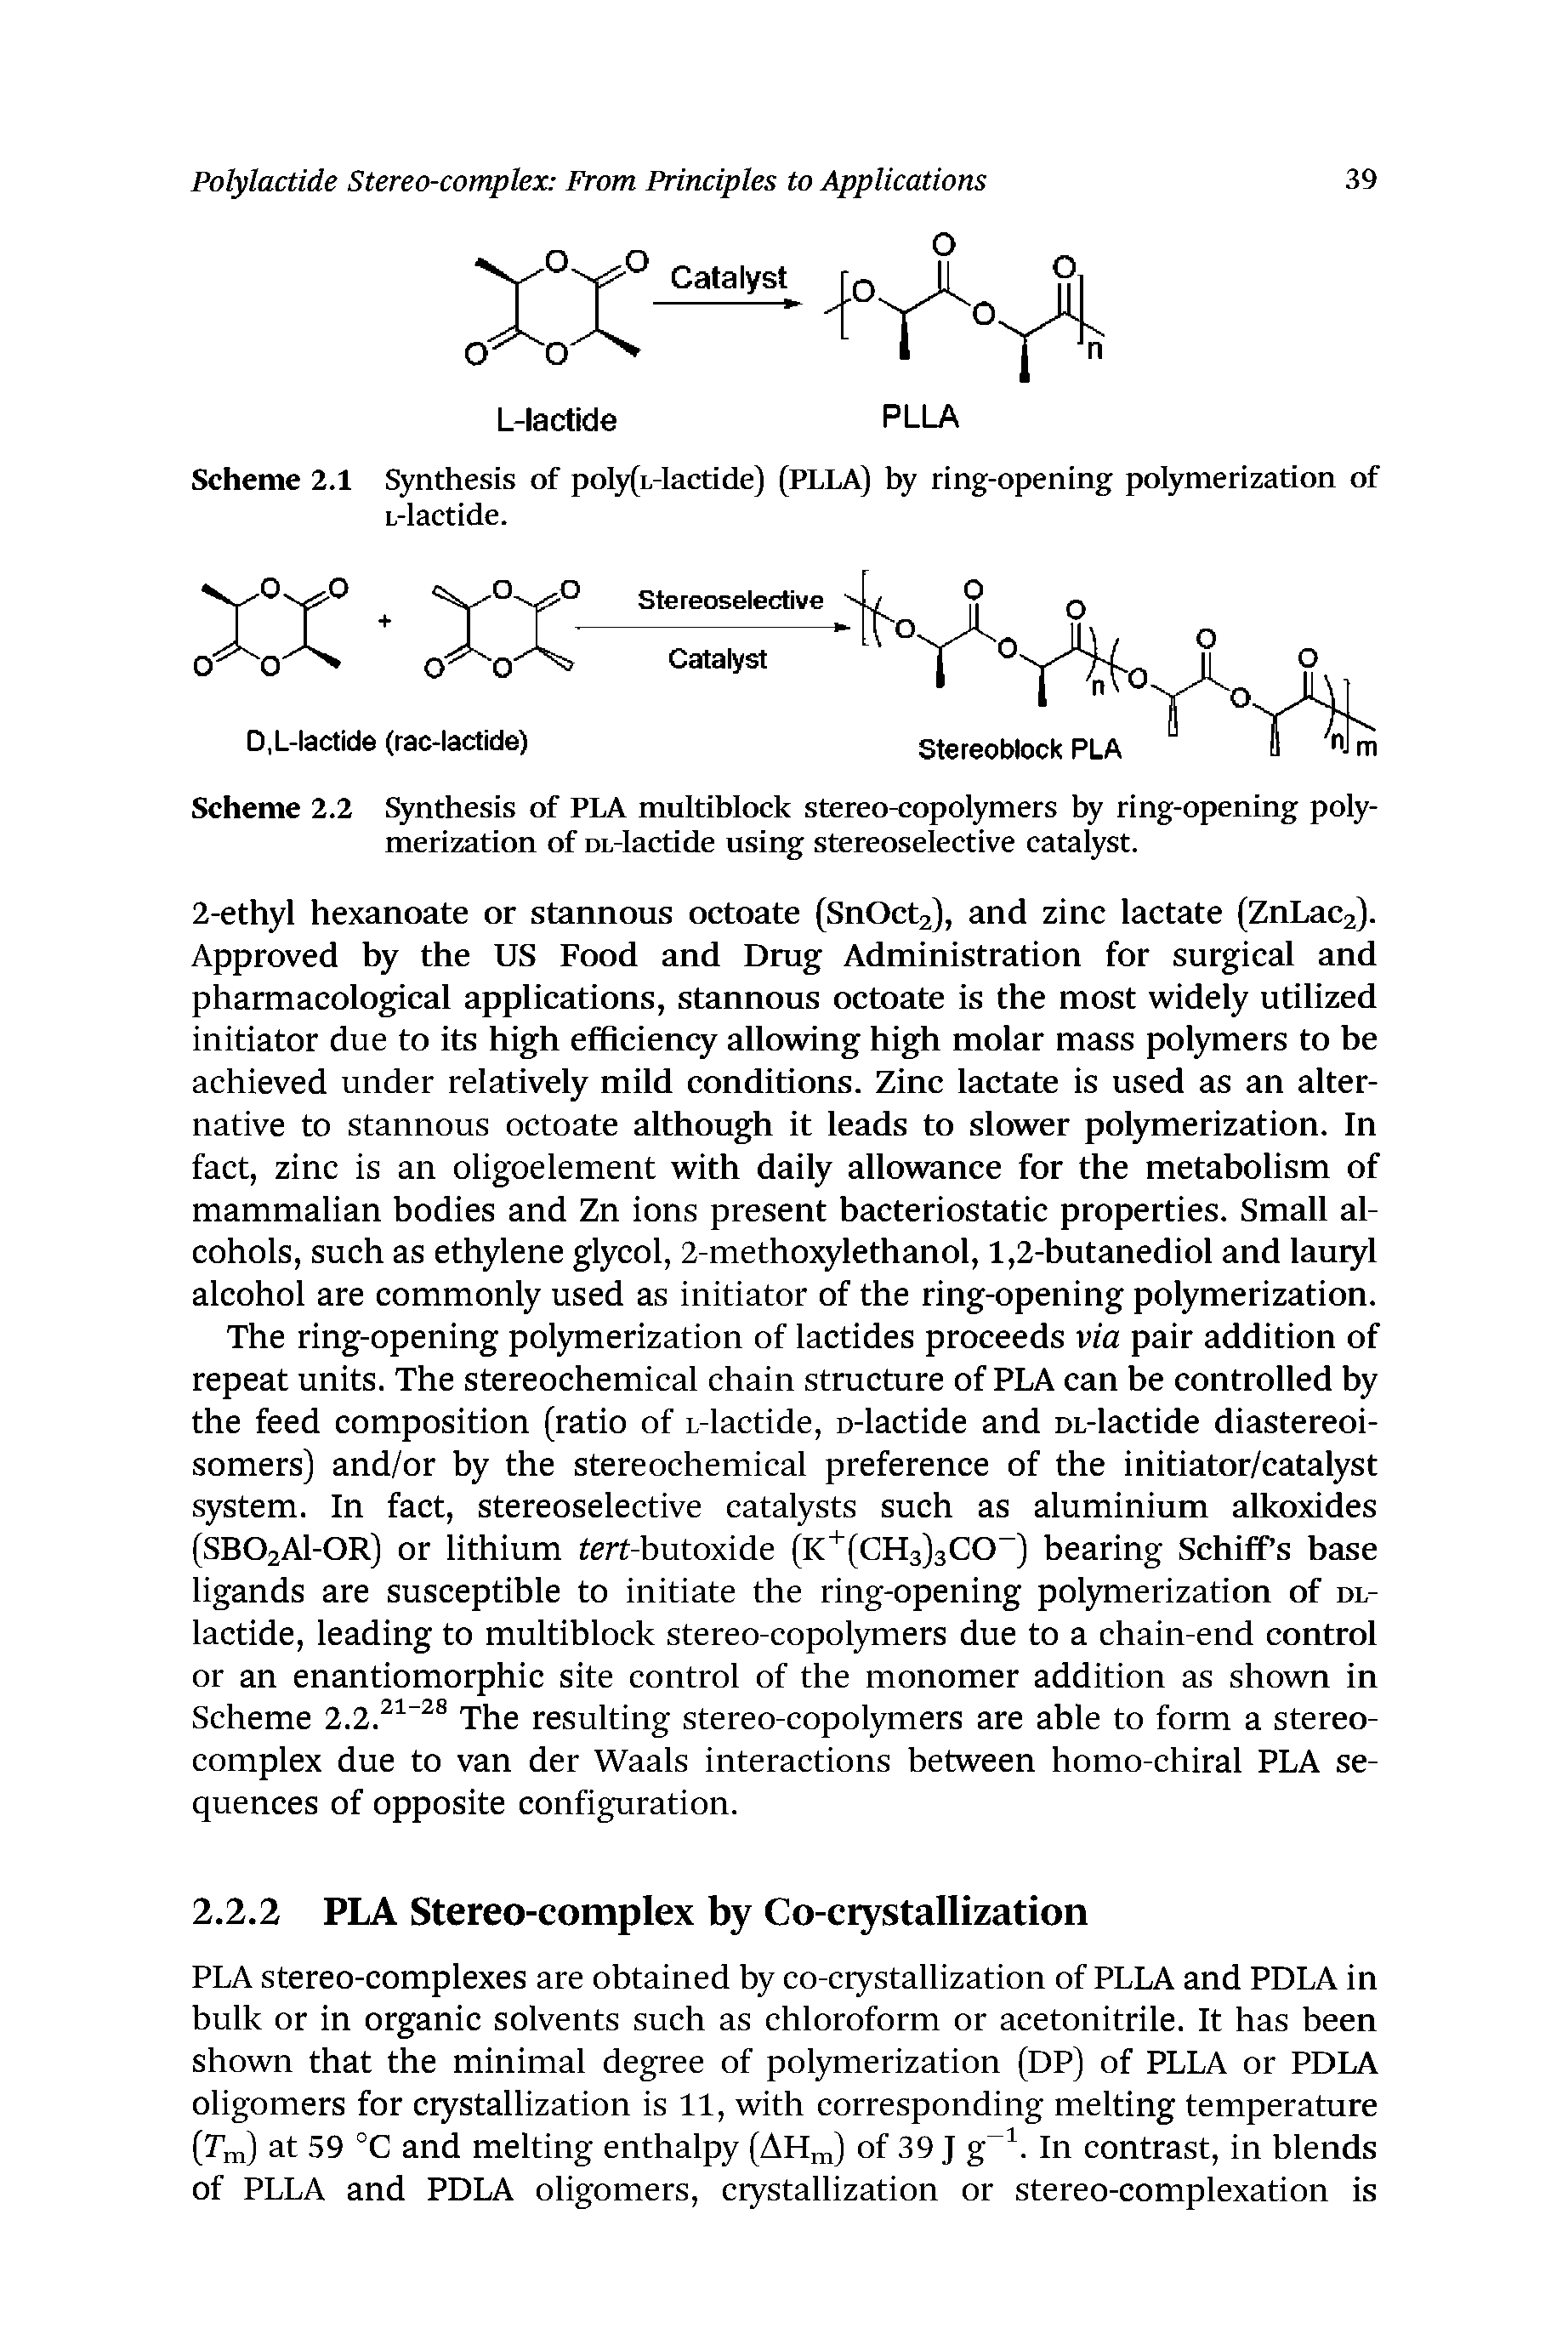 Scheme 2.2 Synthesis of PLA multiblock stereo-copolymers by ring-opening polymerization of DL-lactide using stereoselective catalyst.